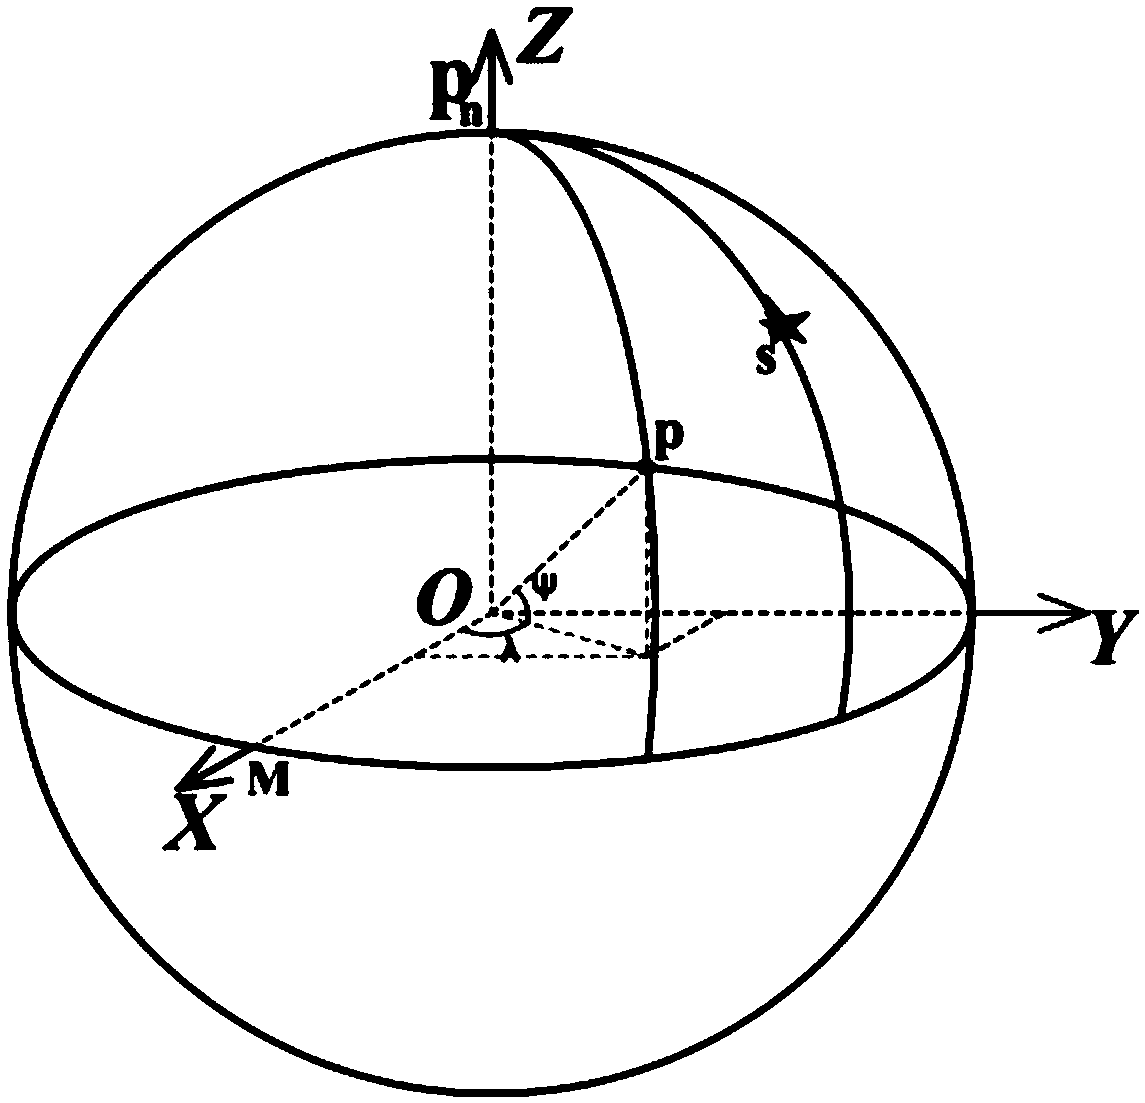 Direct calculation method of celestial fix of double celestial bodies